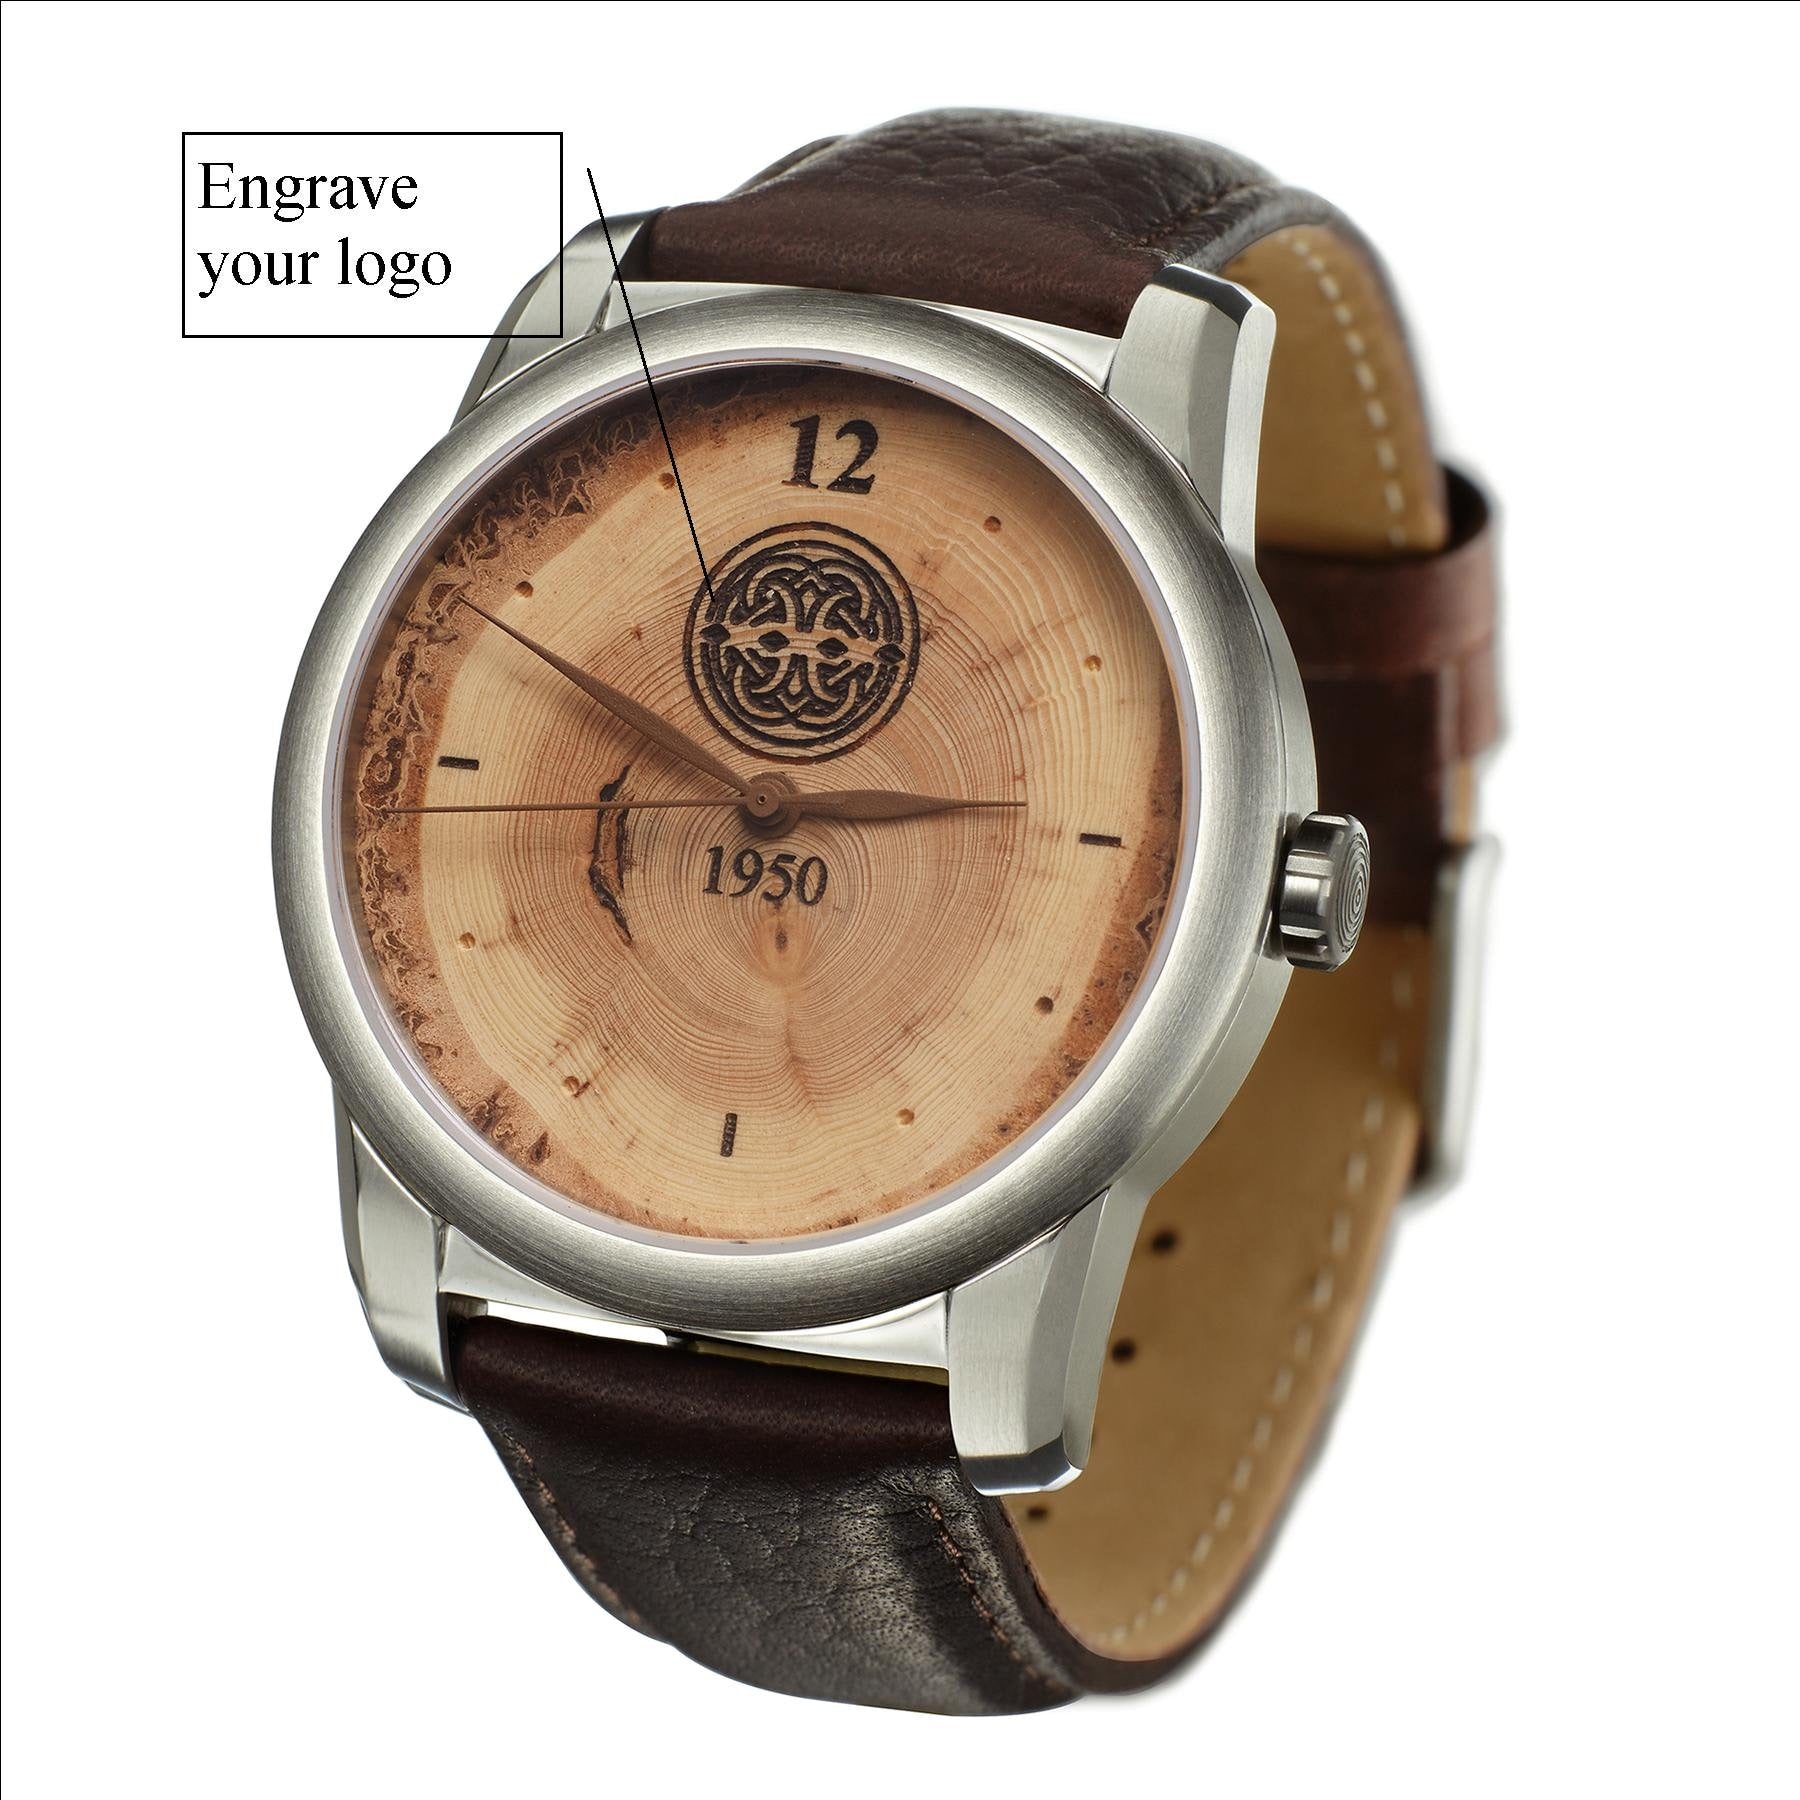 Custom Corporate Retirement Gift Watch | Retirement Gifts for Men | Retirement Present | Wood Engraved